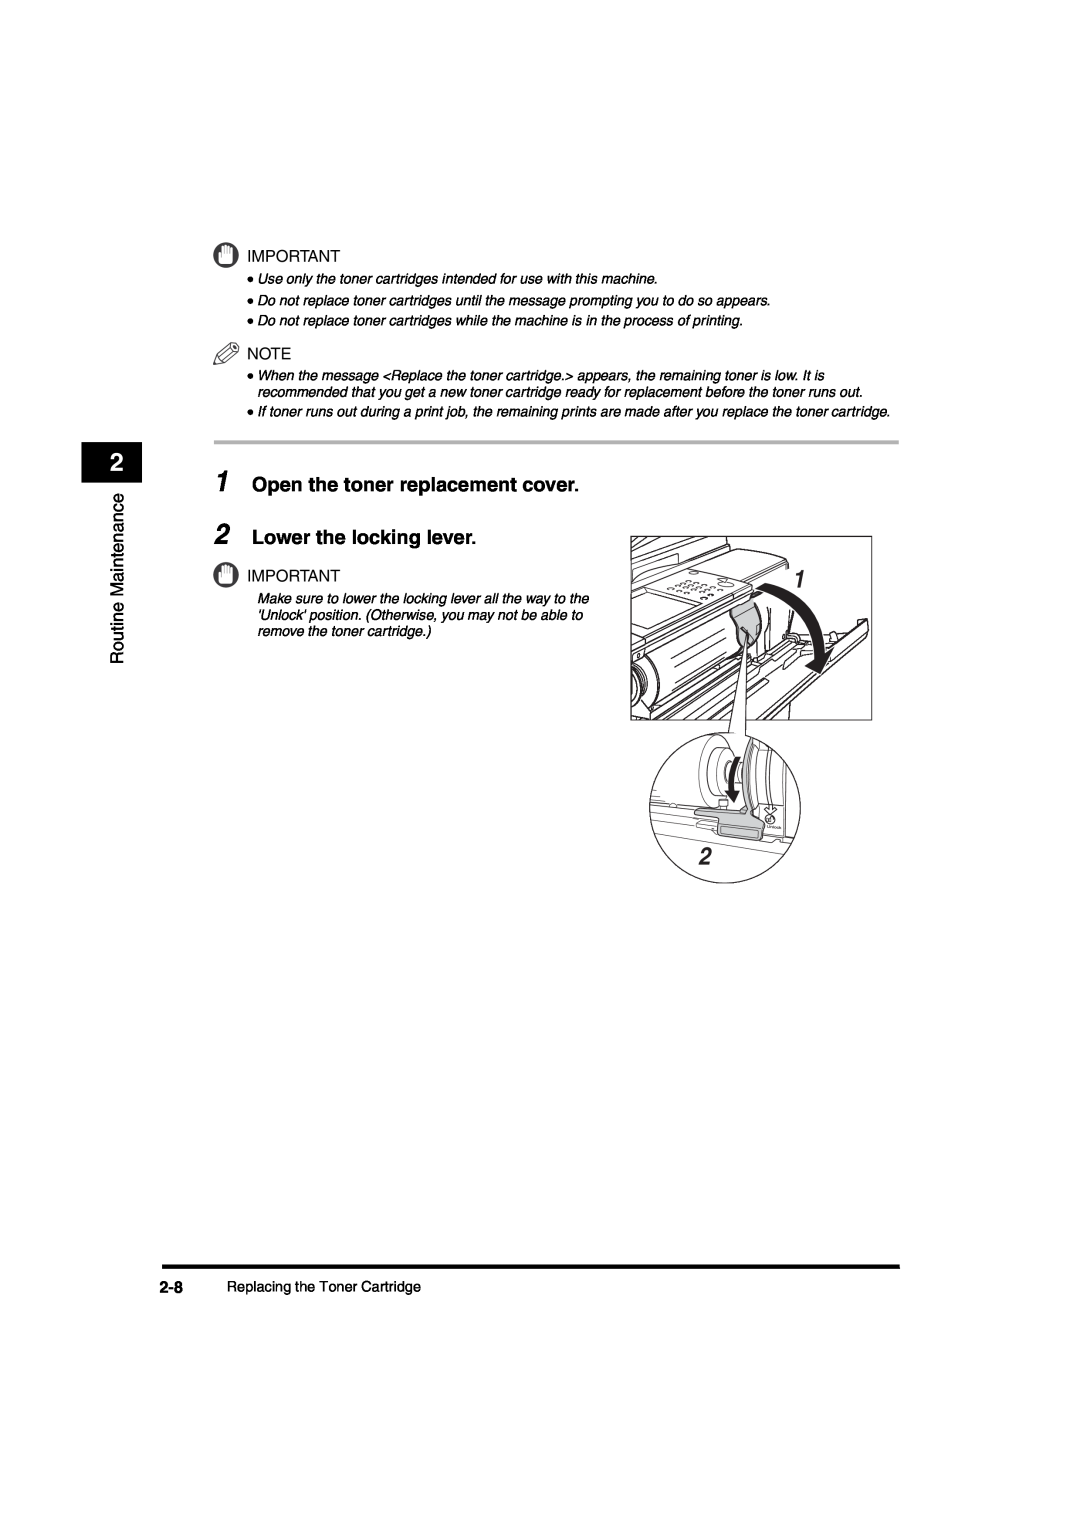 Canon iR6570 manual Open the toner replacement cover 2 Lower the locking lever, Replacing the Toner Cartridge 